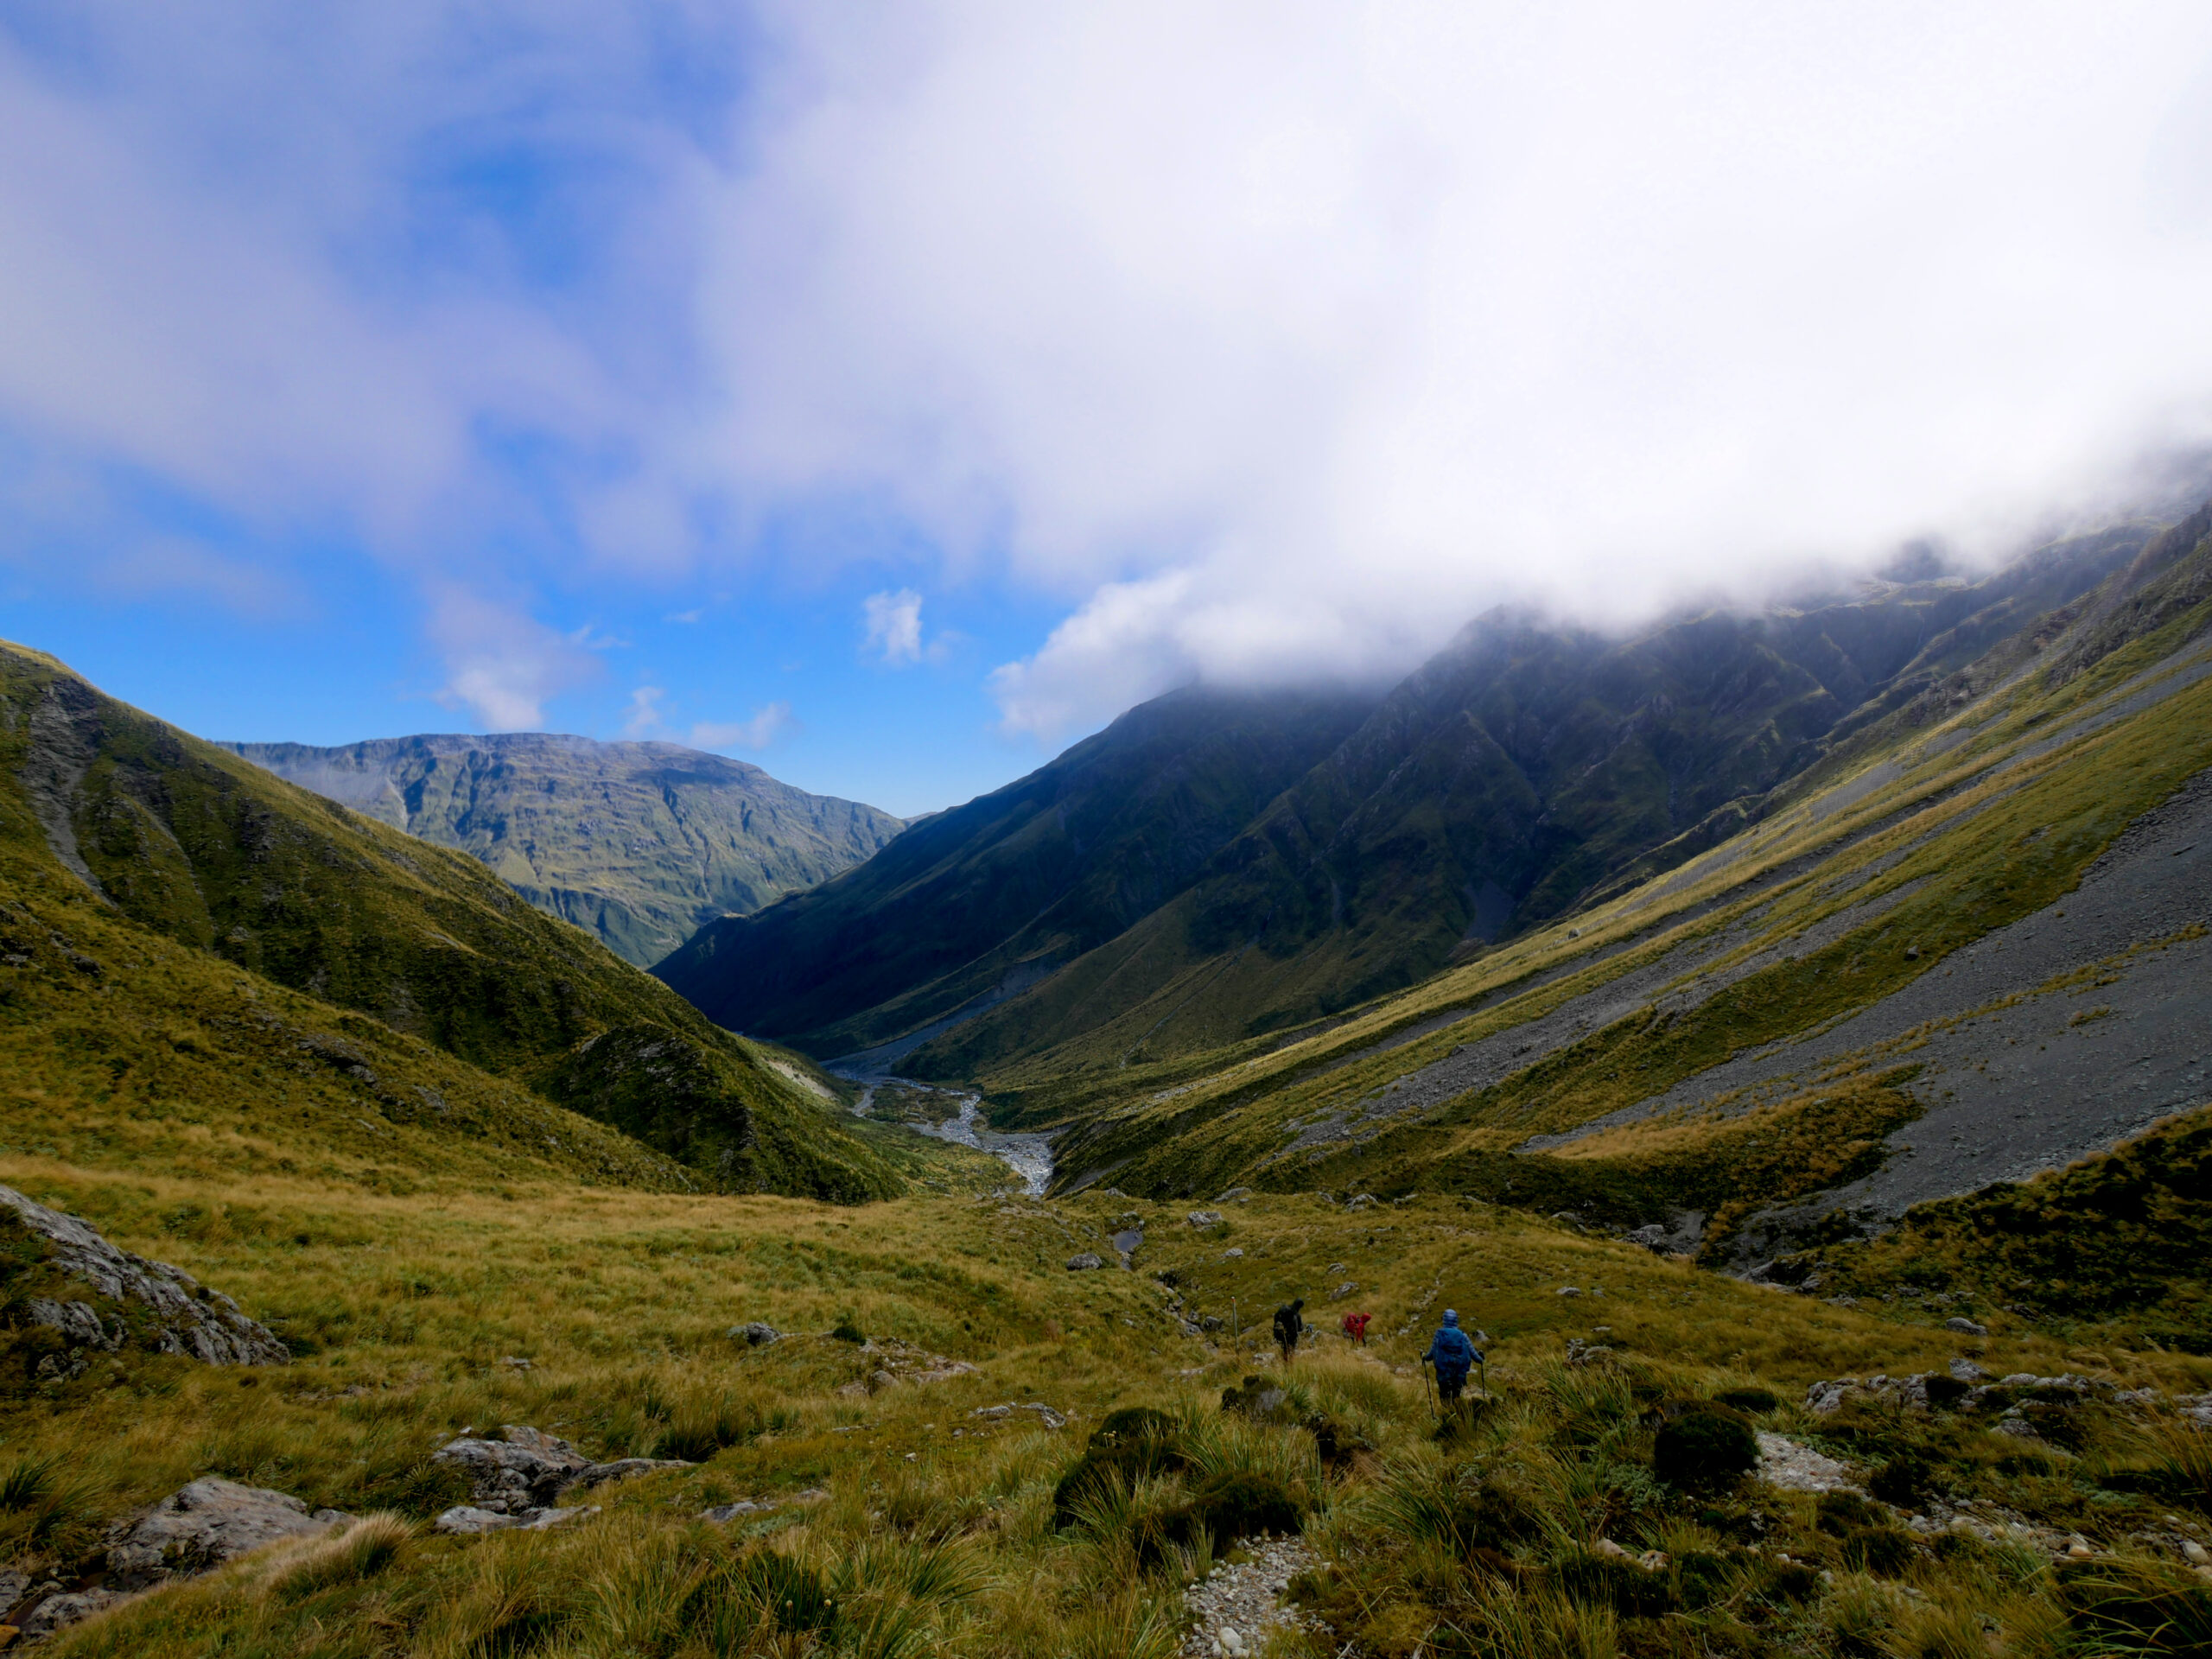 Hikers make their way down the north side of Browning Pass in Arthur's Pass National Park.